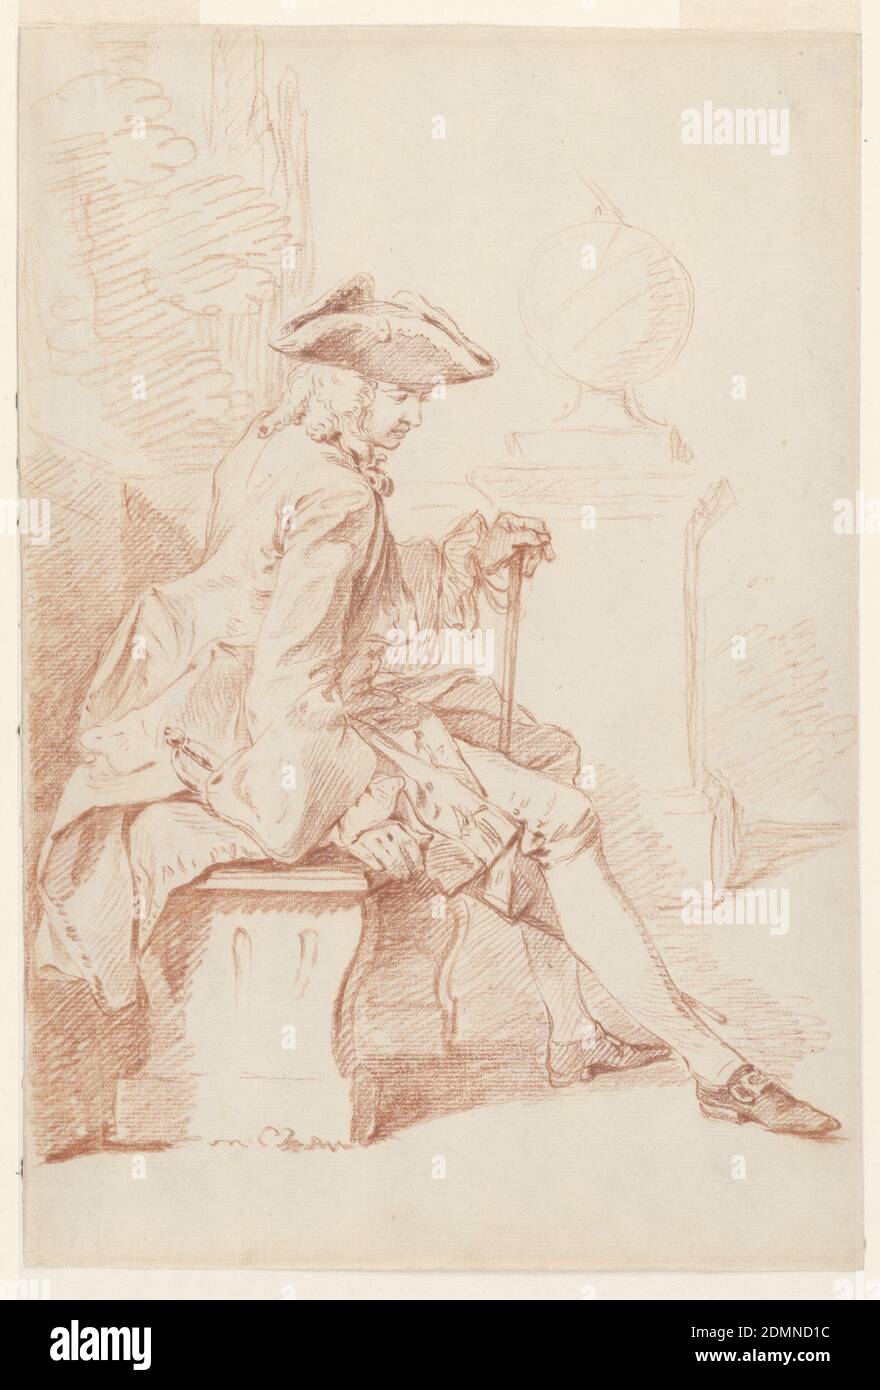 Seated Gentleman, Gravelot, French, 1699 - 1773, active in England, Red chalk on paper, A male figure in gentleman's clothing, shown in profile facing right, seated on a bench in a park. A sphere (globe) on a pedestal in the right middle distance. Verso: reddened for tracing., France, ca. 1735, figures, Drawing Stock Photo